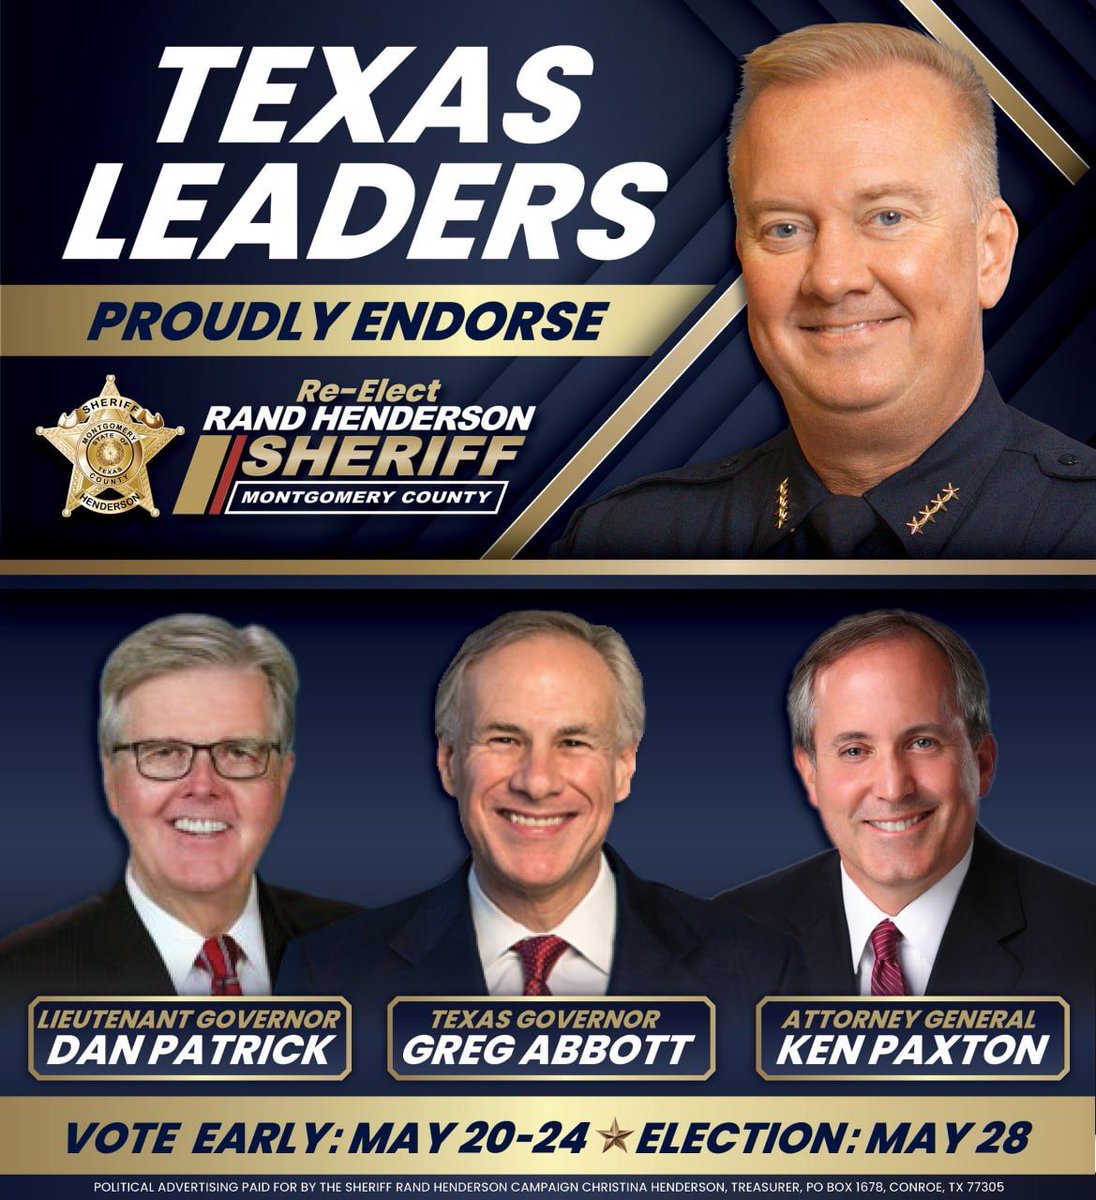 In a world that's constantly changing & often unpredictable, I stand ready to lead the @MCTXSheriff through whatever comes our way. I believe in real results, not empty promises or political theater. Count on me to do the job & do it well. #ExperienceMatters #IStandwithRand